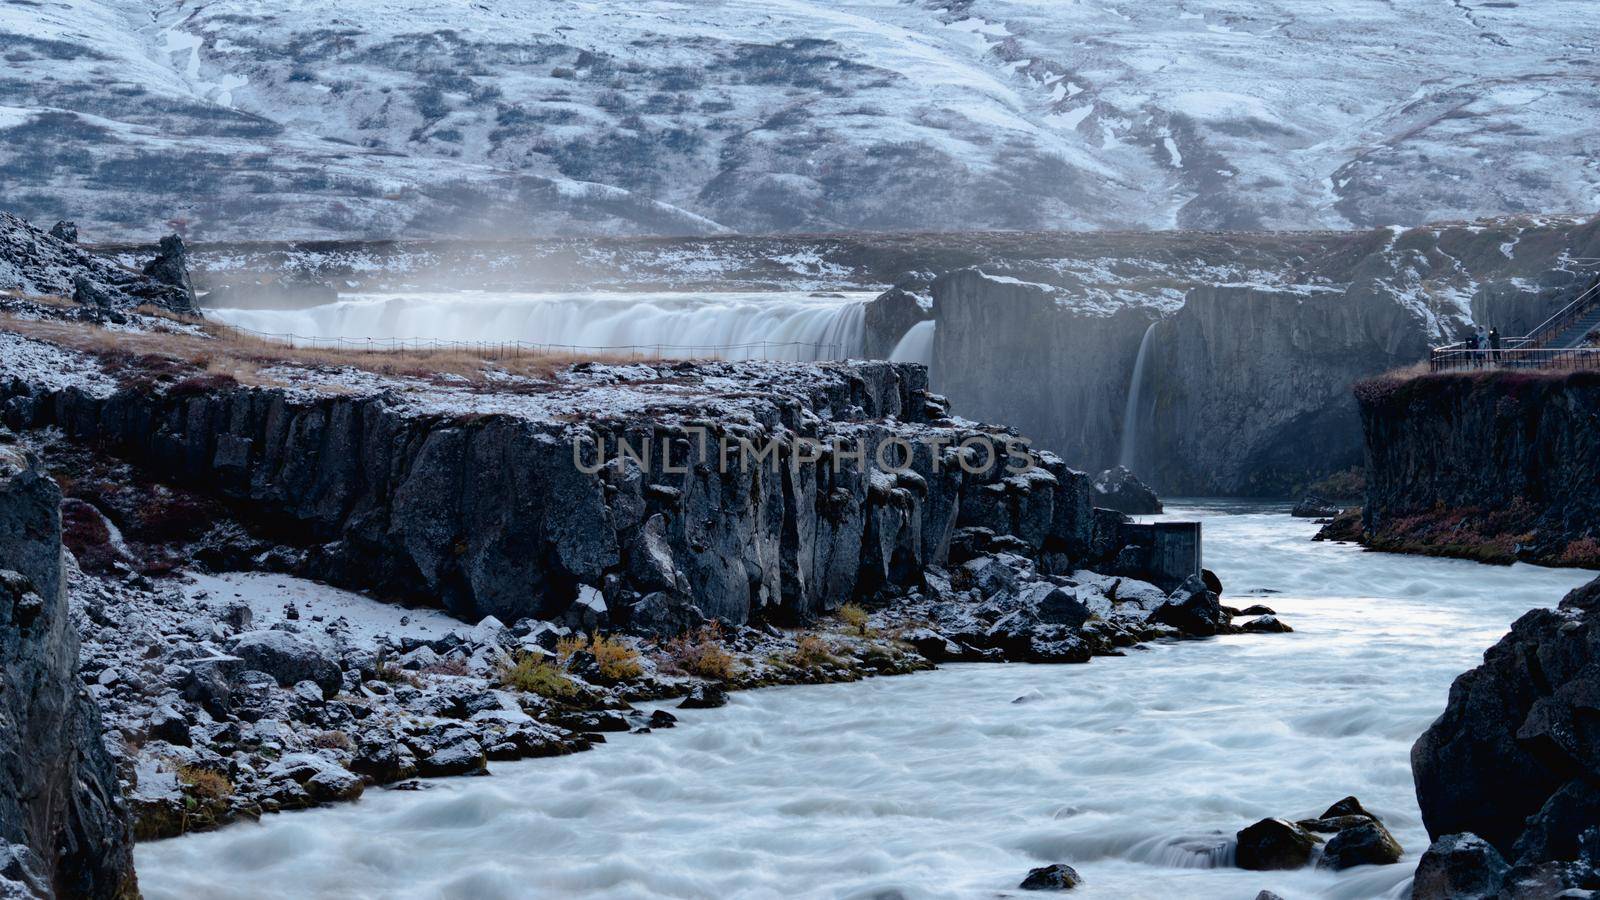 Godafoss, Icelandic waterfall long exposure from the distance by FerradalFCG